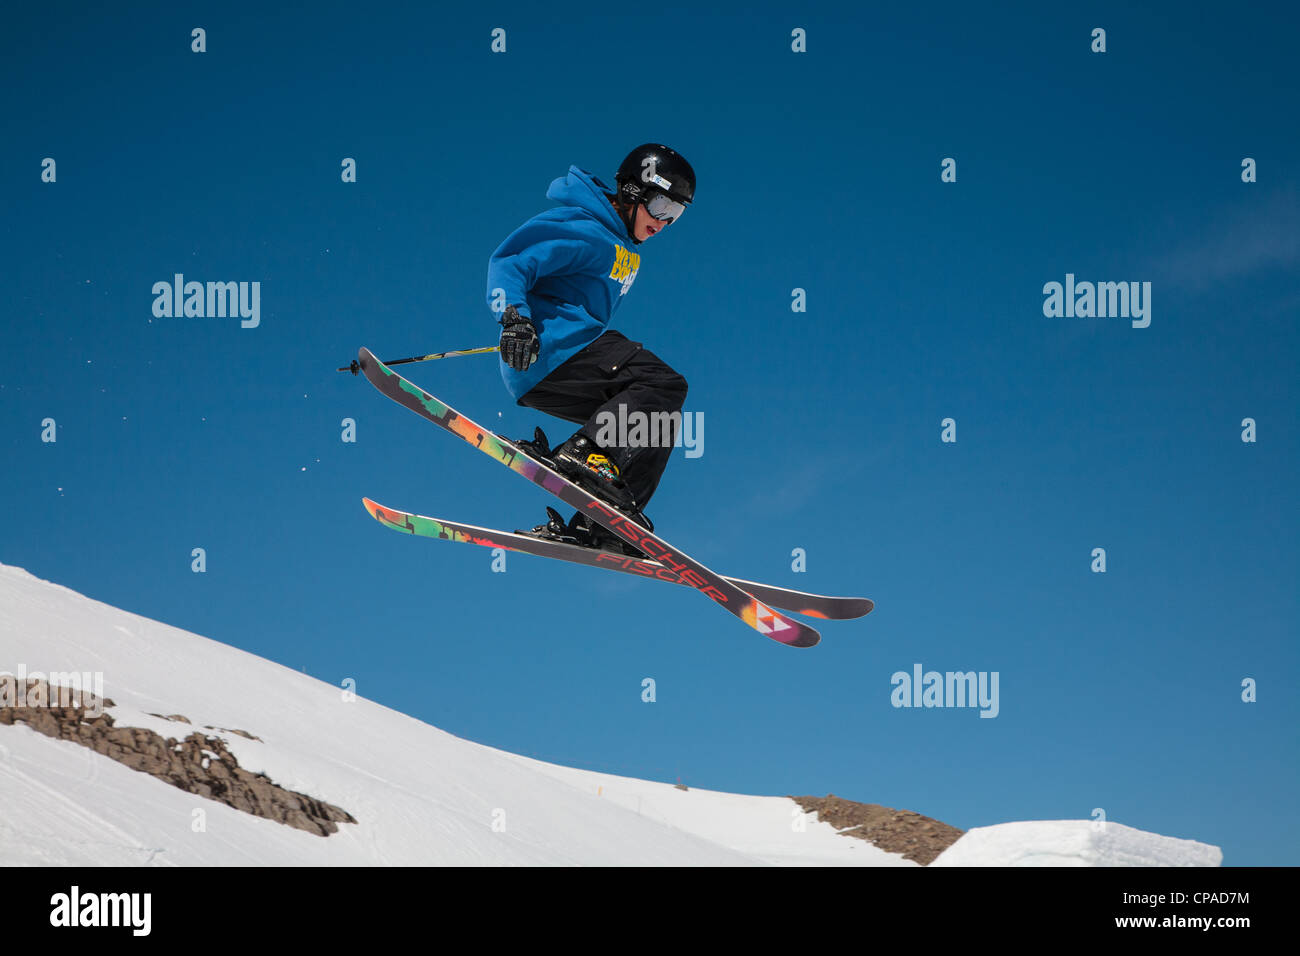 A free-style skier executes a jump against a clear blue sky. 1 of 2. Stock Photo